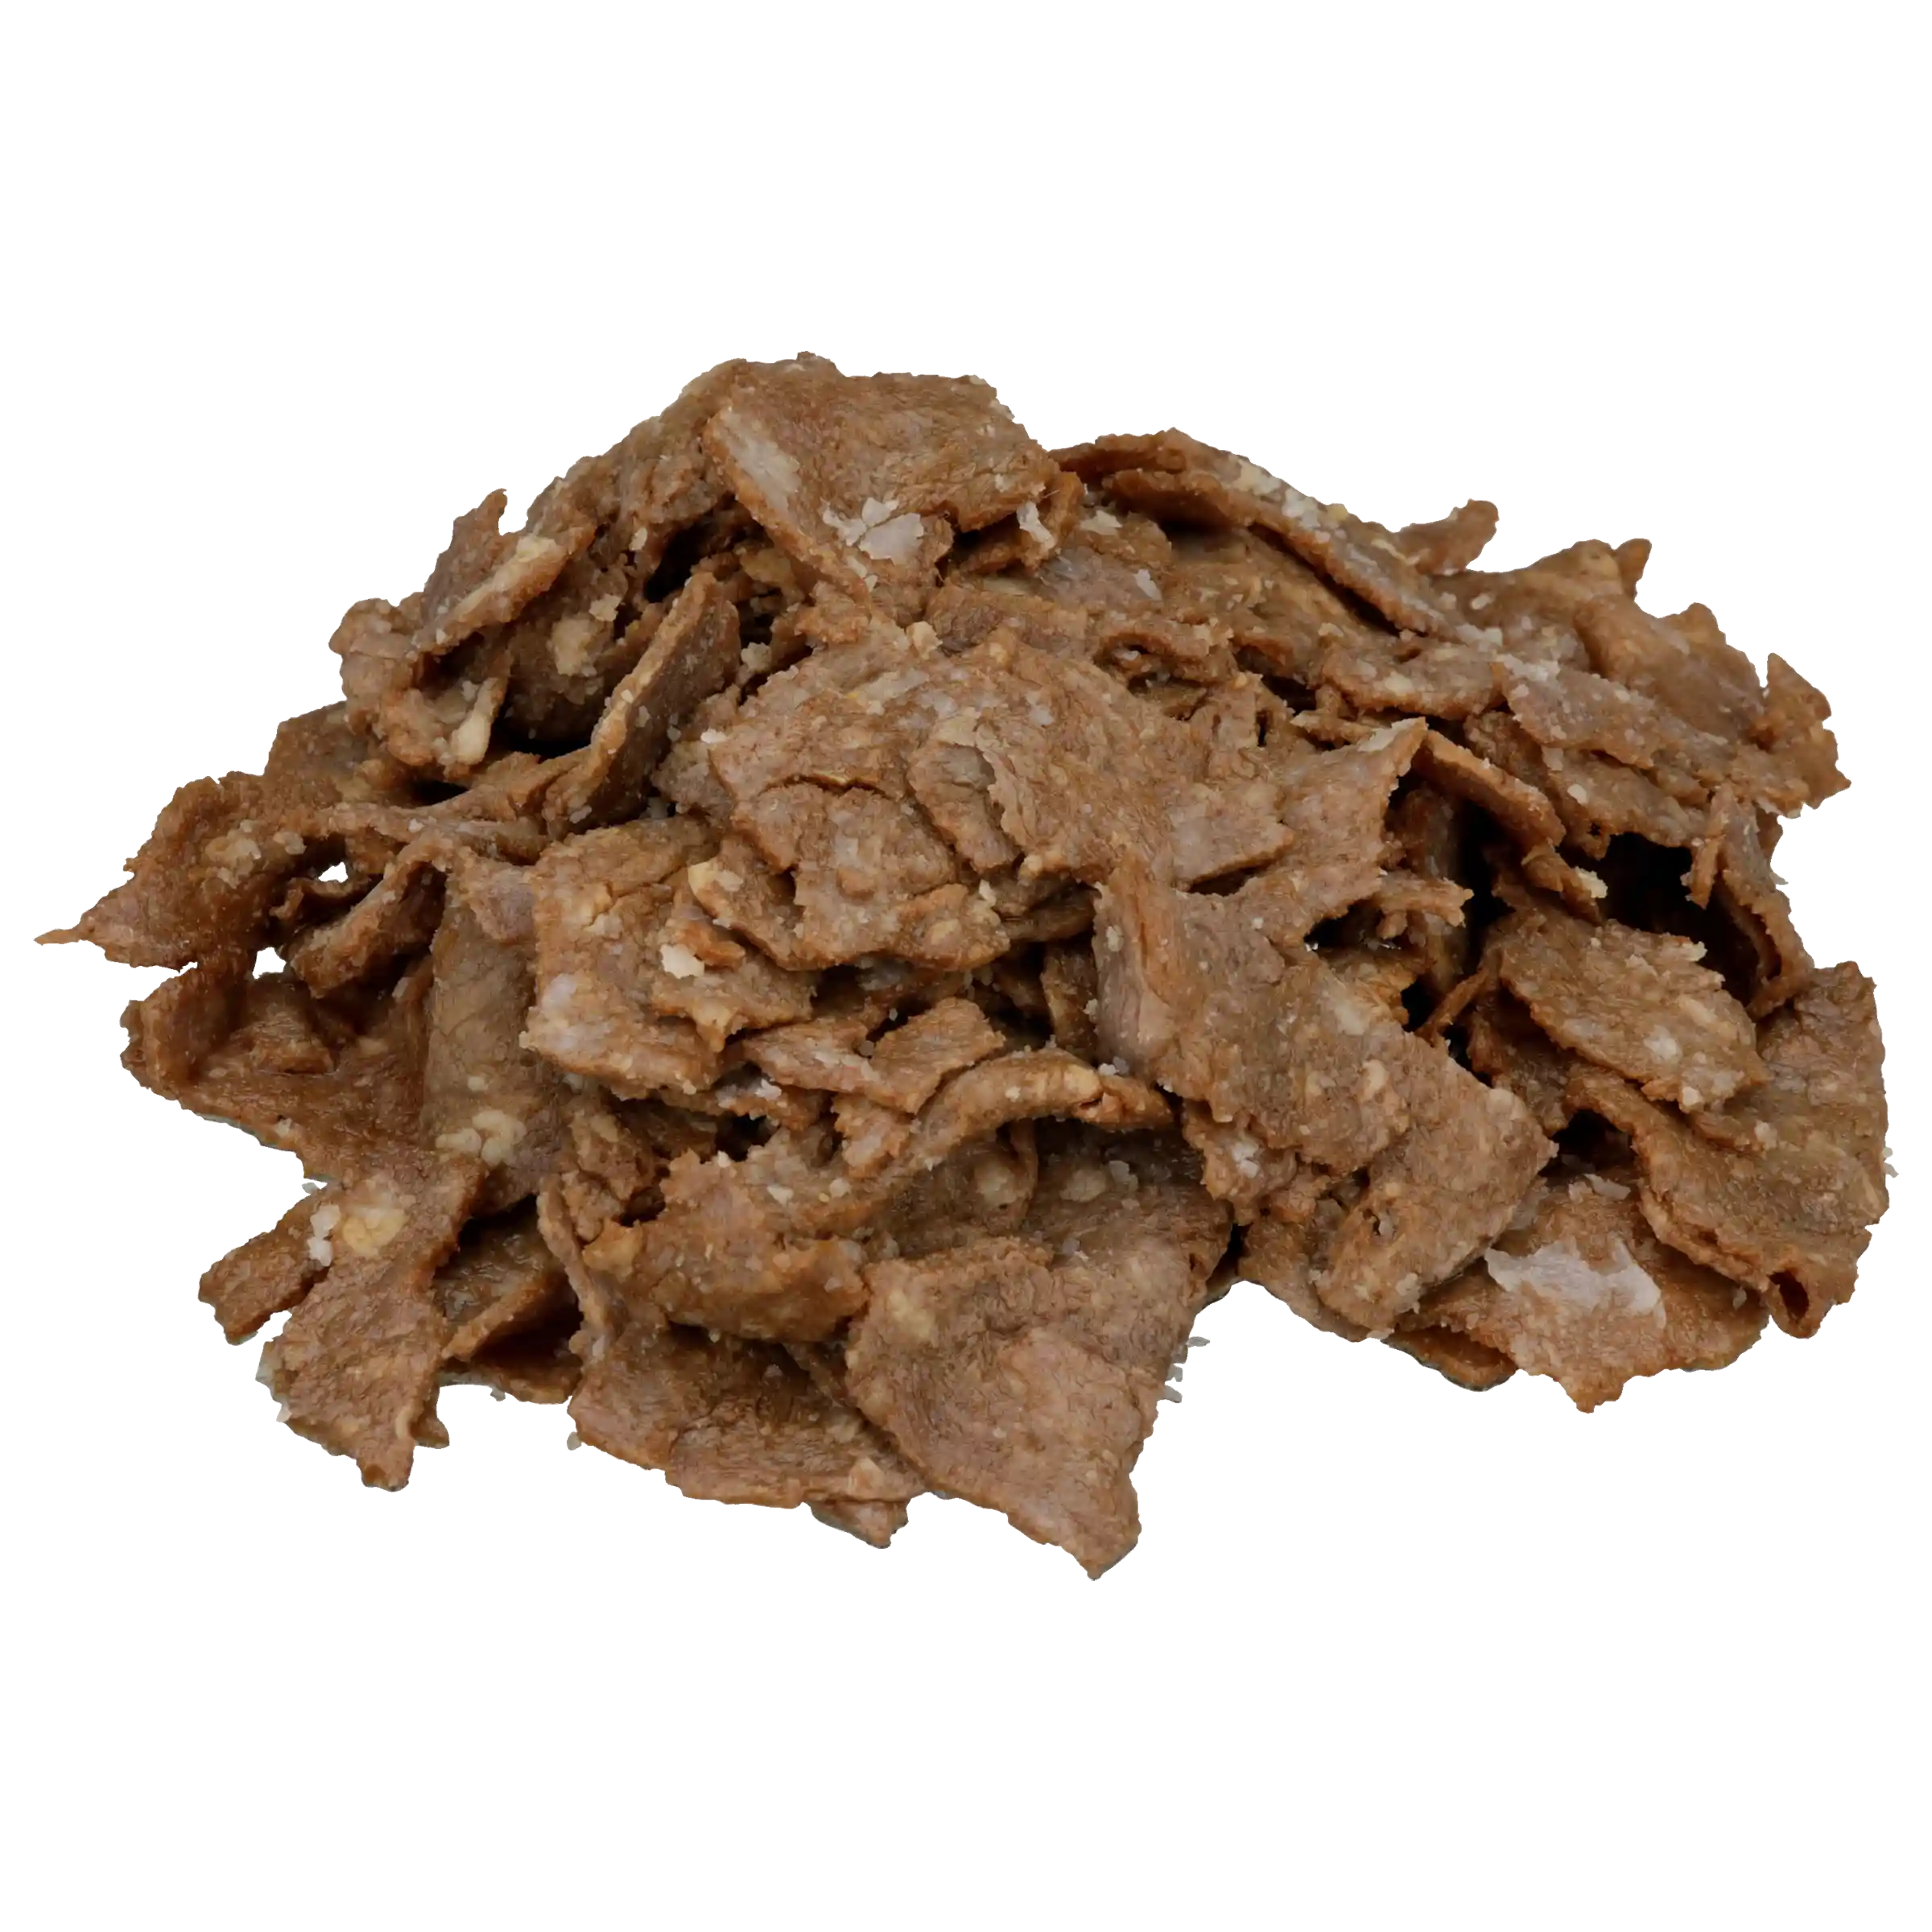 Steak-EZE® Redi Steak® Fully Cooked Philly Style Beef Sliced Steak_image_11